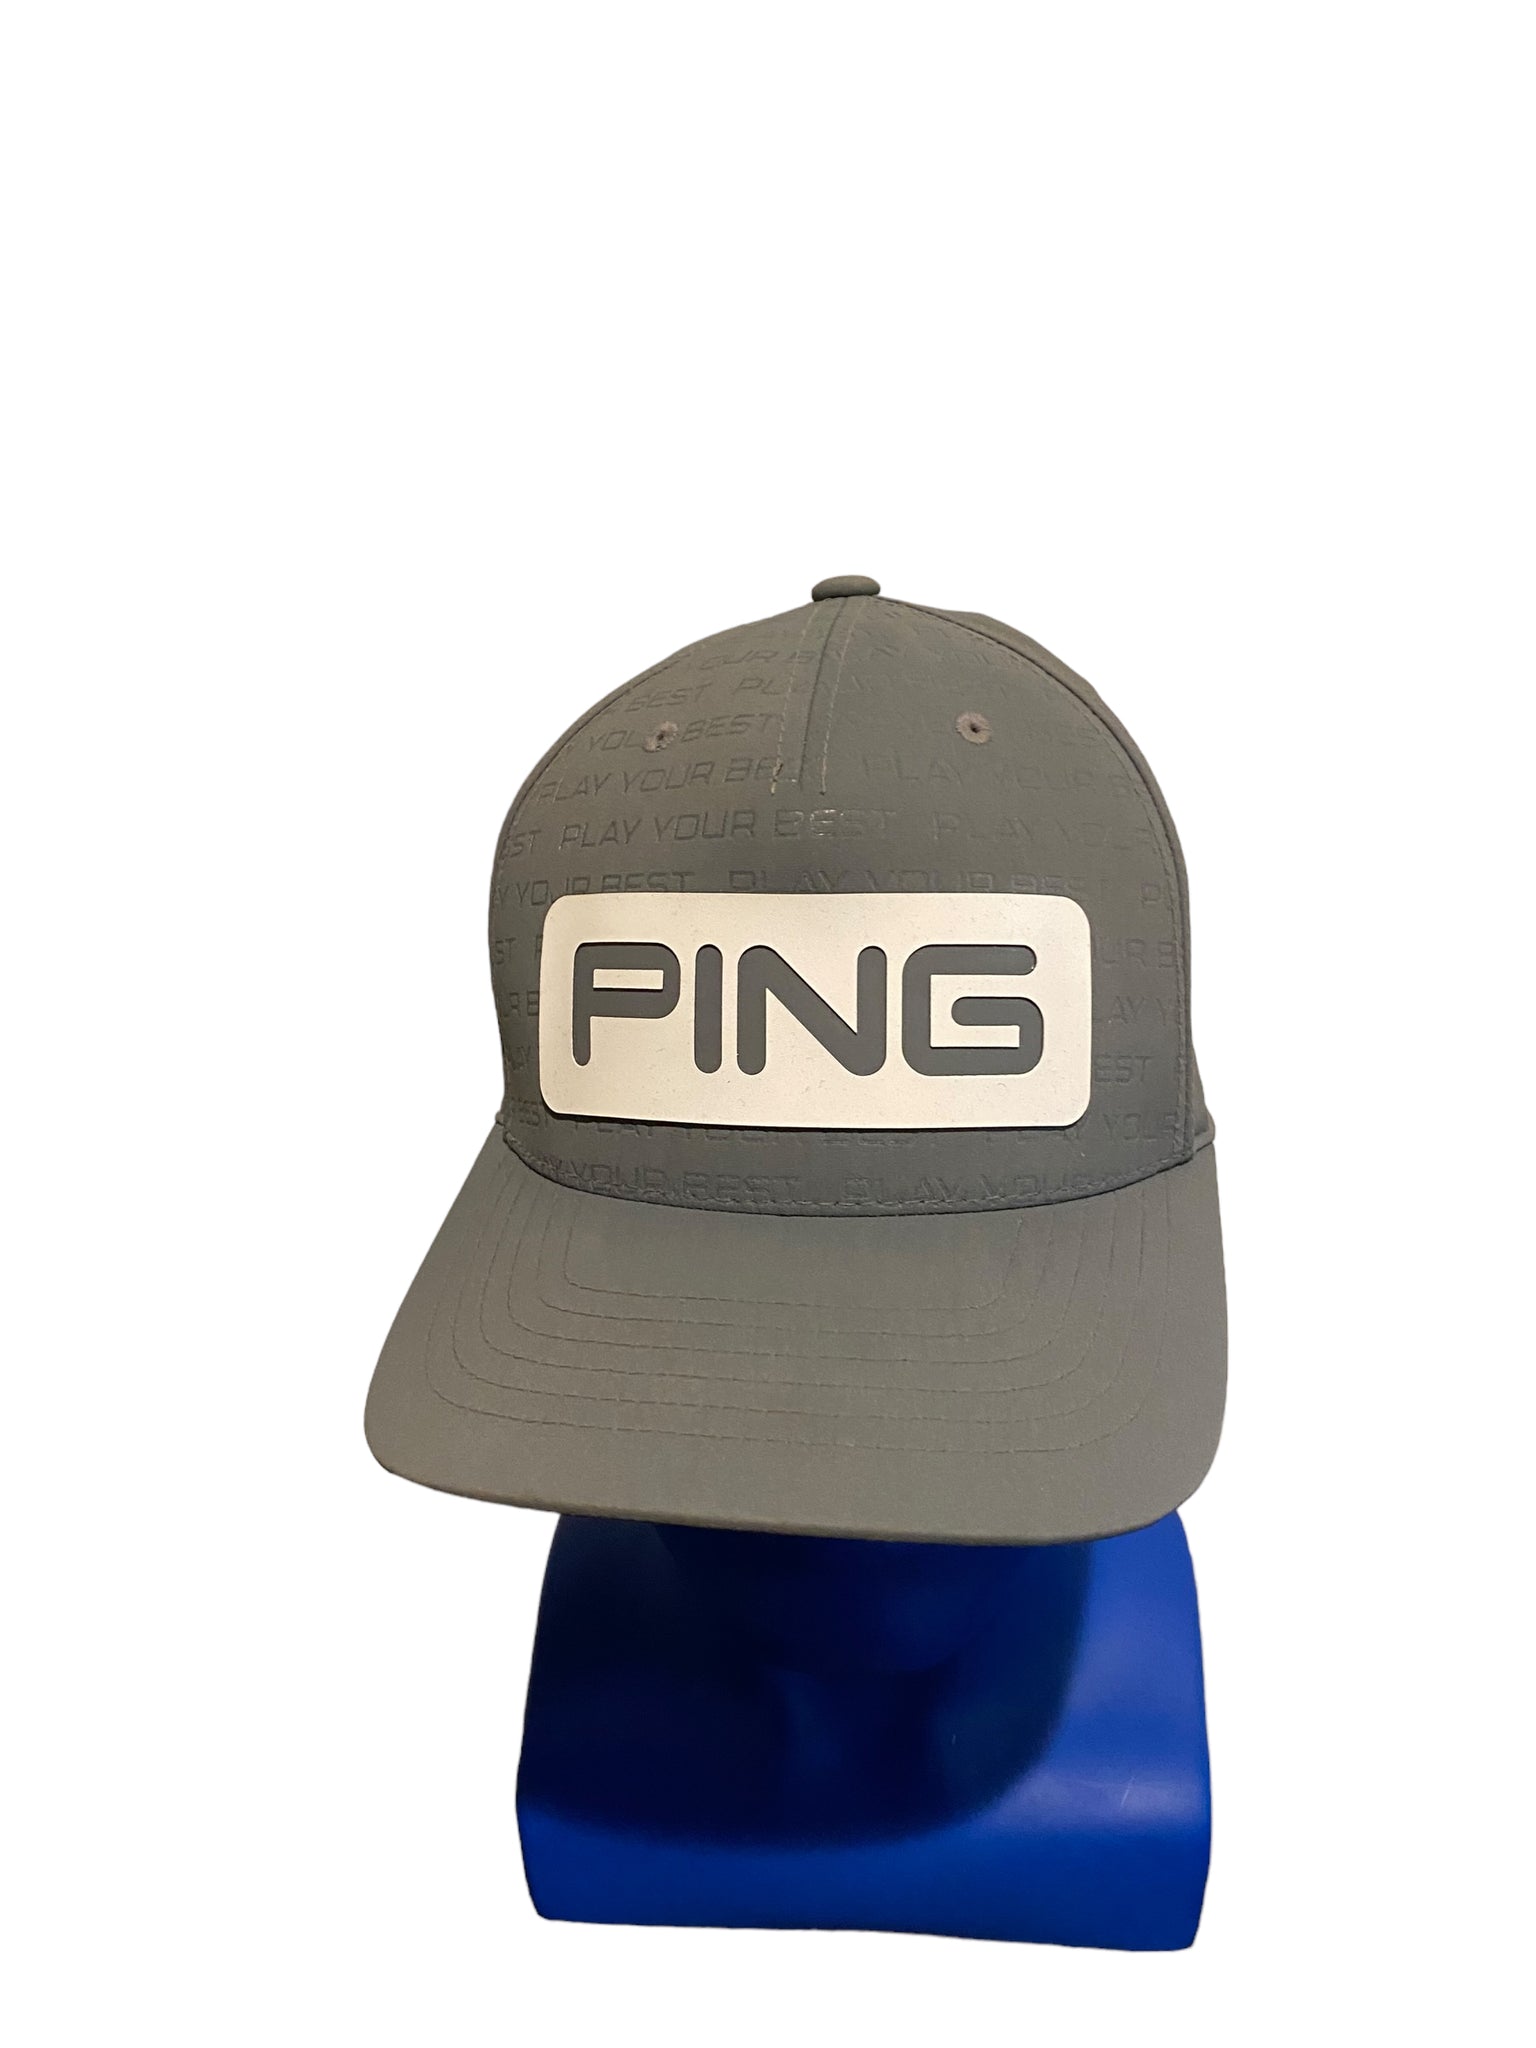 PING White Patch Debossed Play Your Best Golf Cap Hat Flexfit 110 Grey snapback